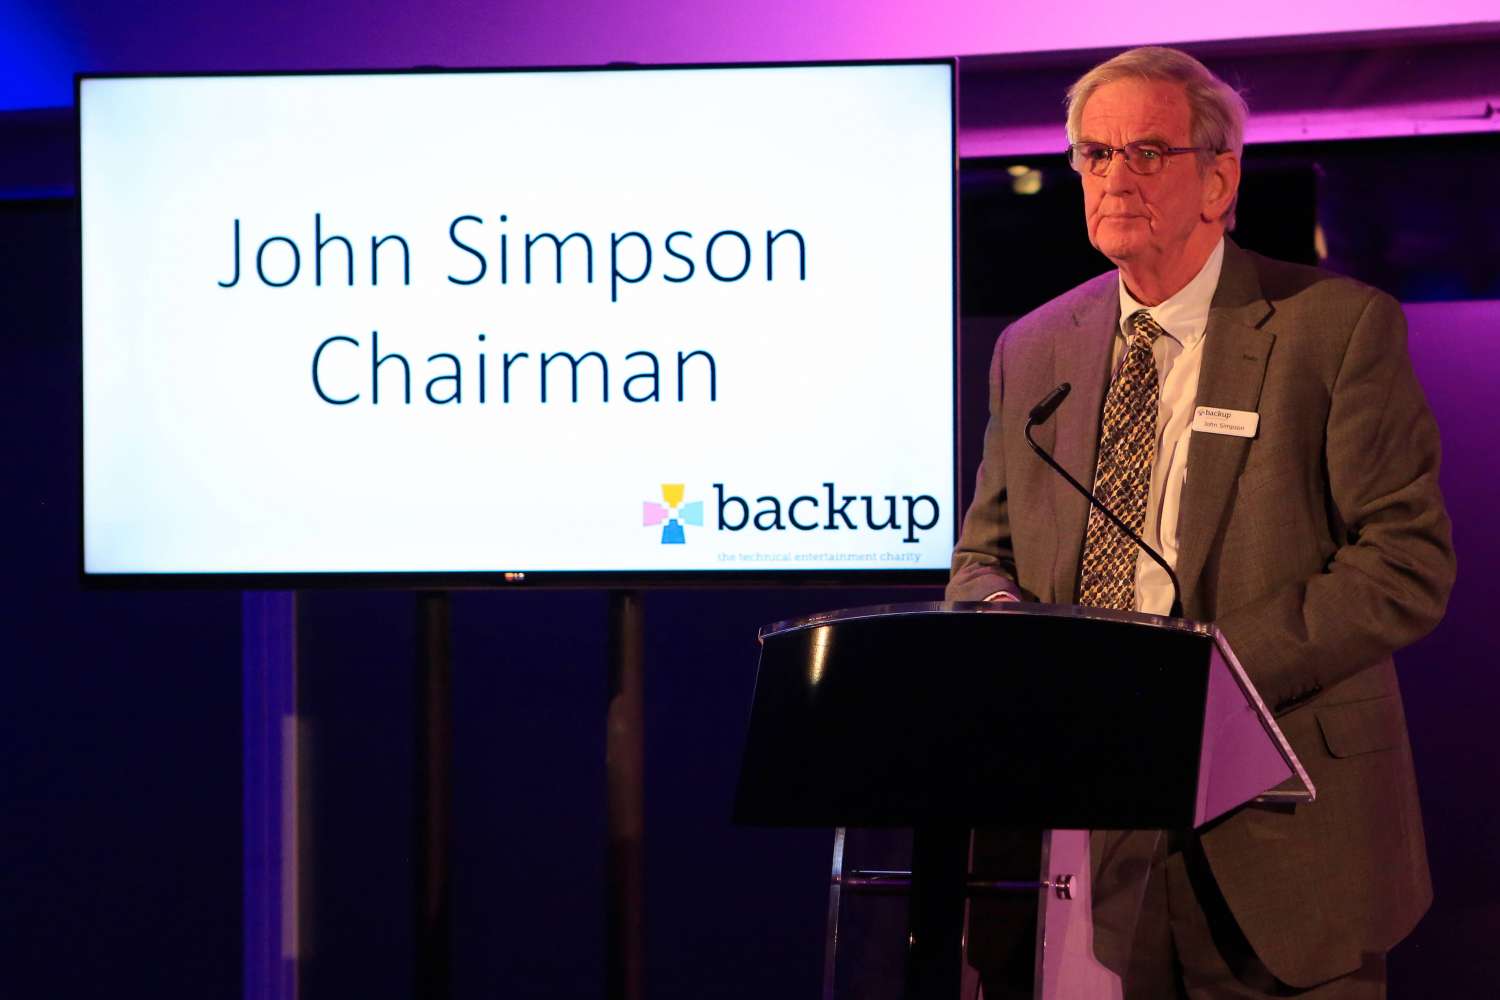 Backup’s chairman, John Simpson, welcomed guests to The Hospital Club in London’s Covent Garden (photo courtesy of Scott Willsallen)